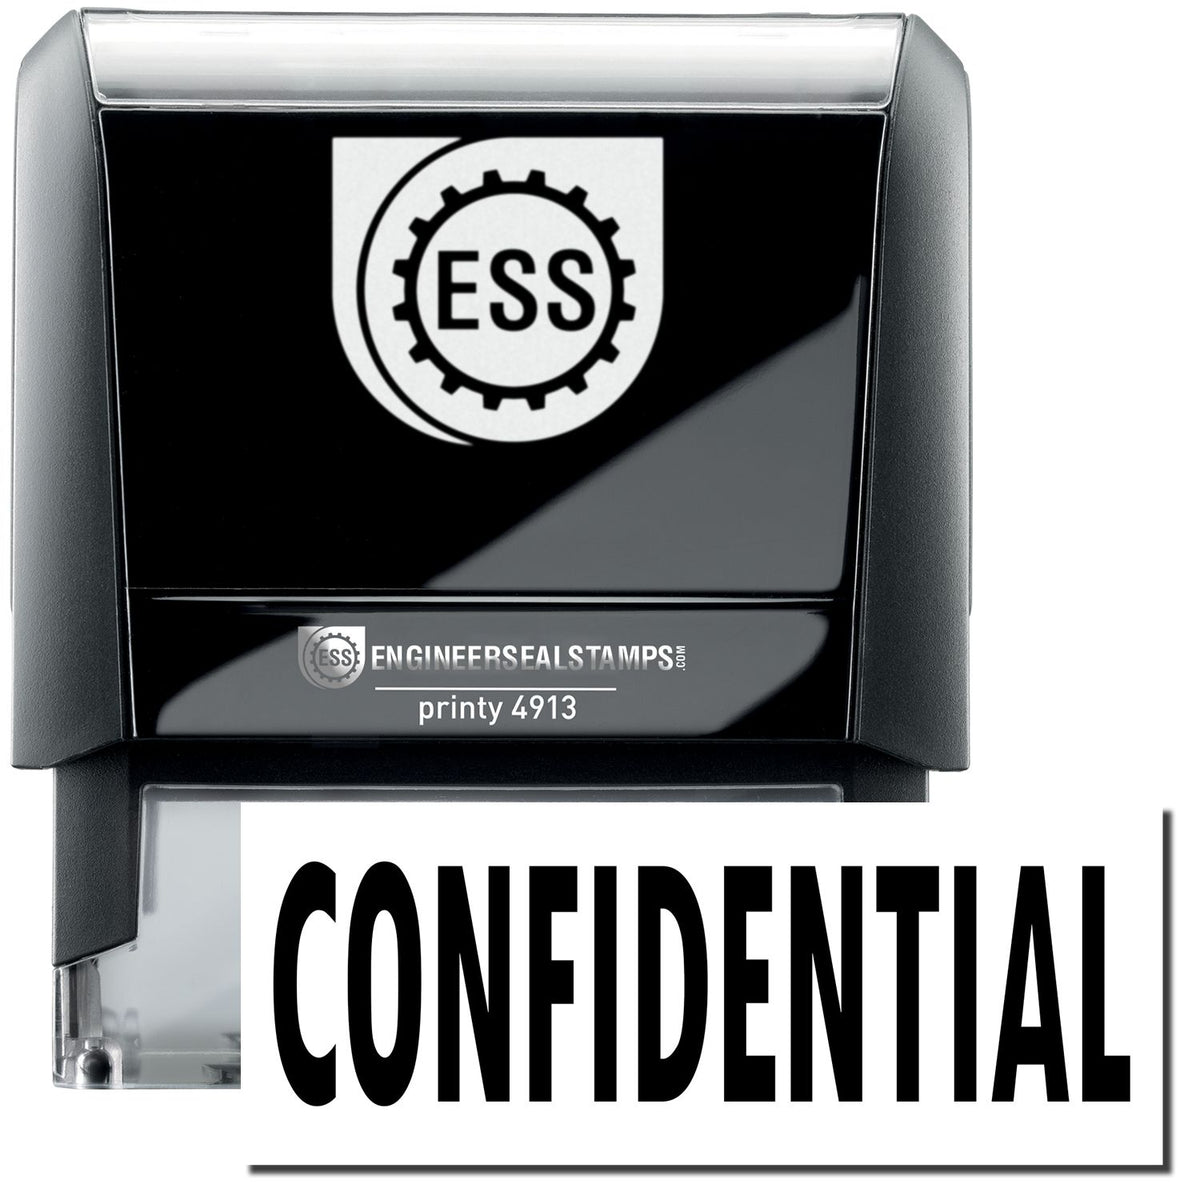 A large self-inking stamp with a stamped image showing how the text &quot;CONFIDENTIAL&quot; in a large bold font is displayed by it.